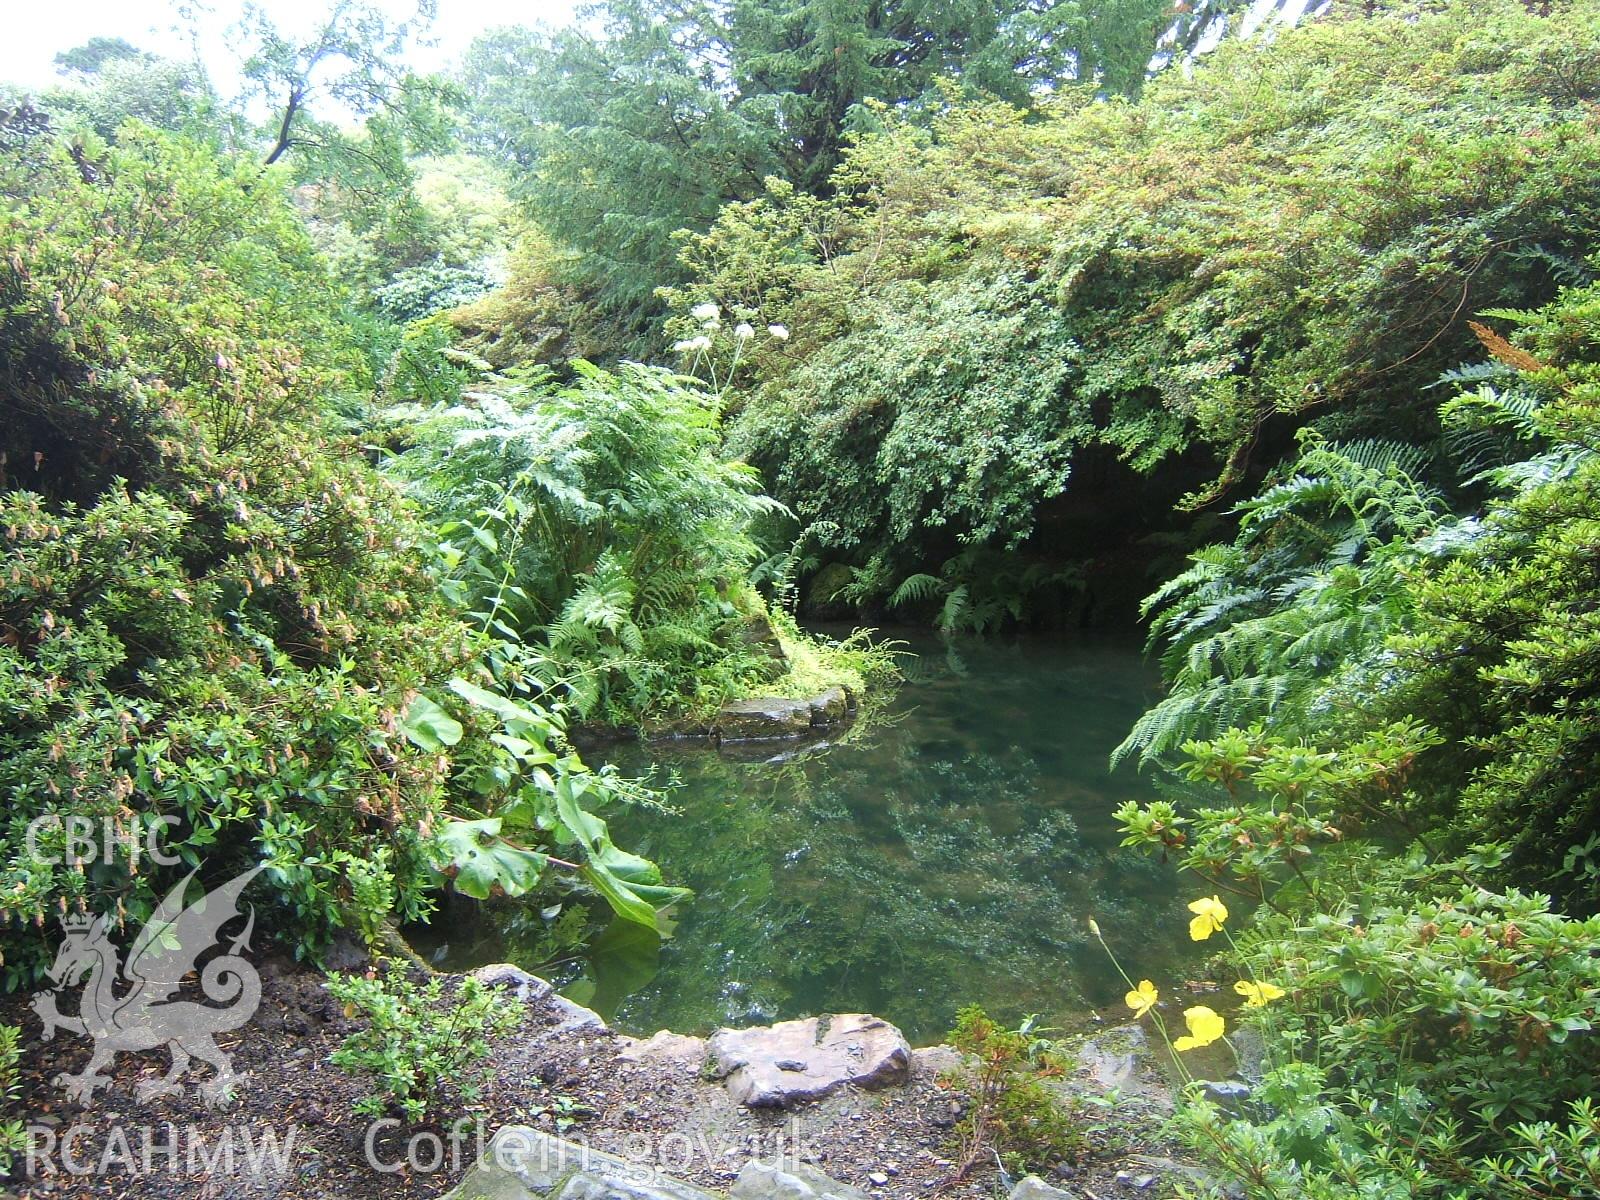 Ornamental pond above north-east end of the Rock Garden.